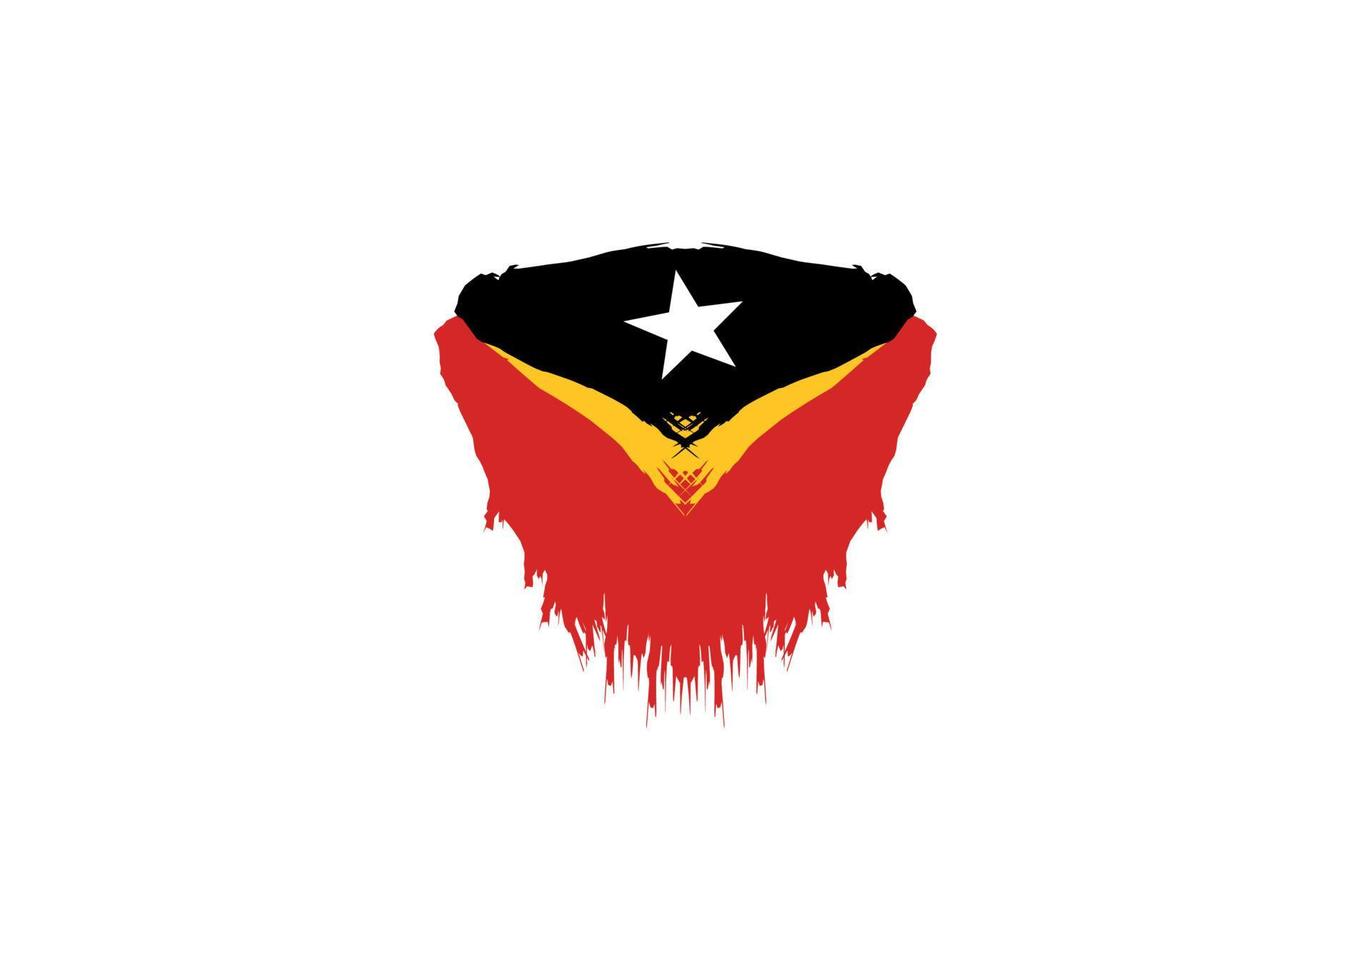 East Timor flag icon, illustration of the national flag design with the concept of elegance vector